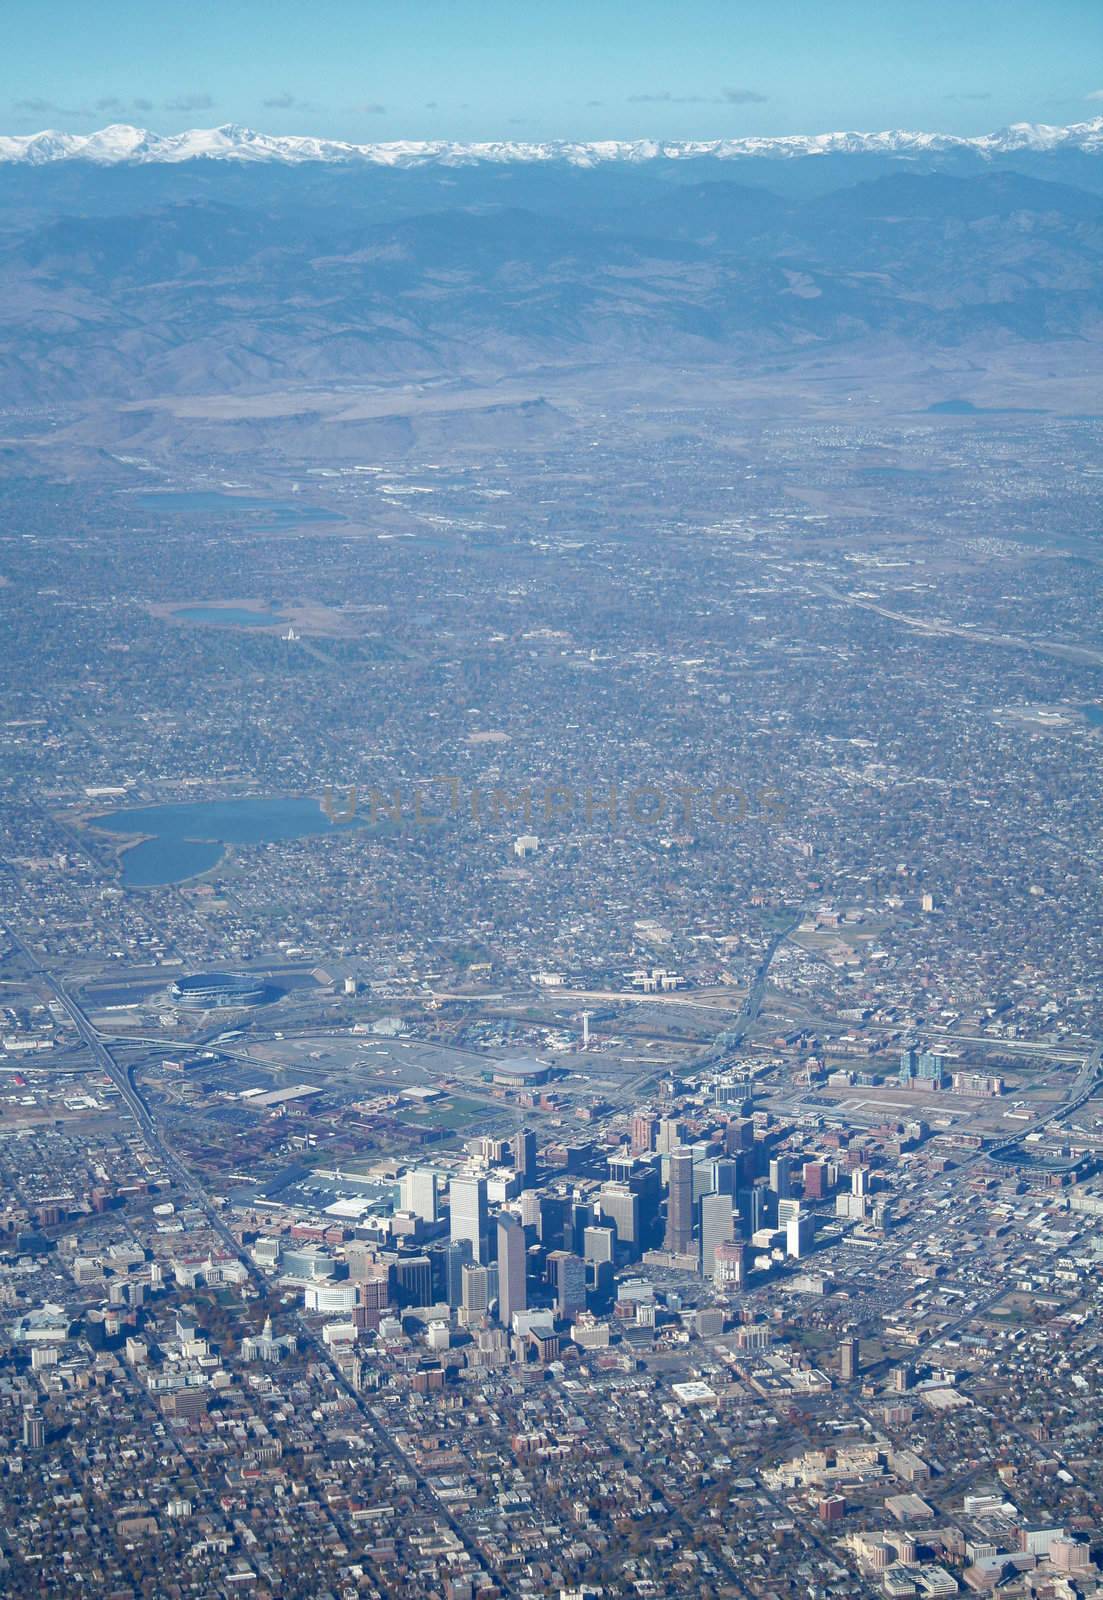 Aerial view of Denver Colorado and mountains with snow